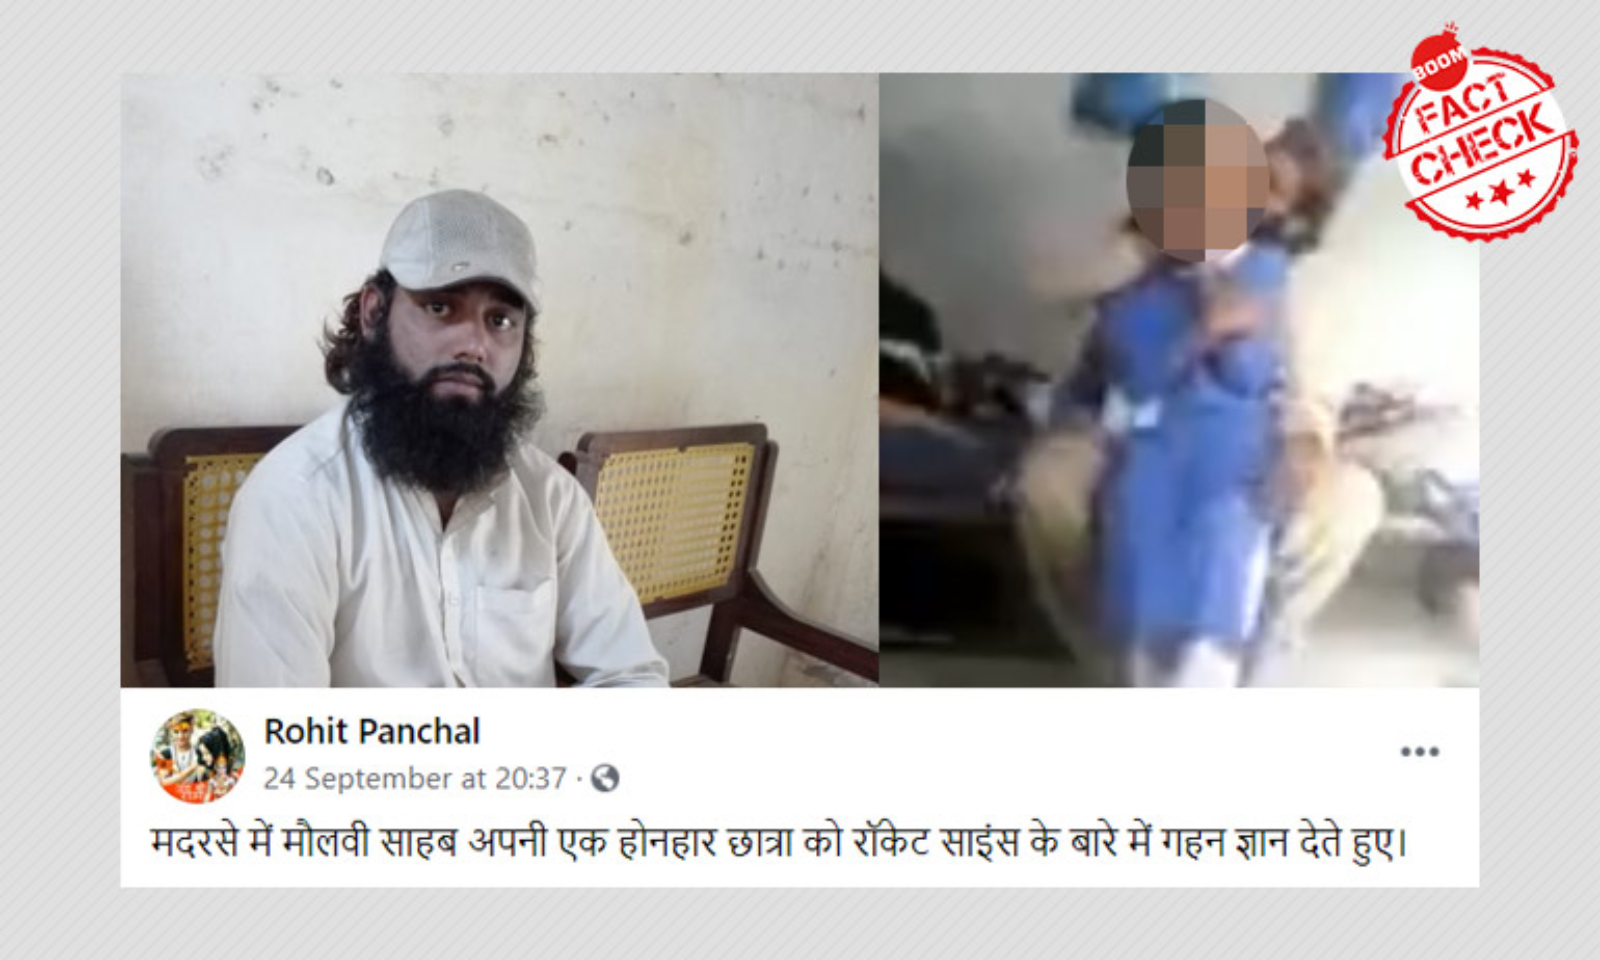 Viral Video Of A Maulvi Molesting A Minor Is From Pakistan | BOOM